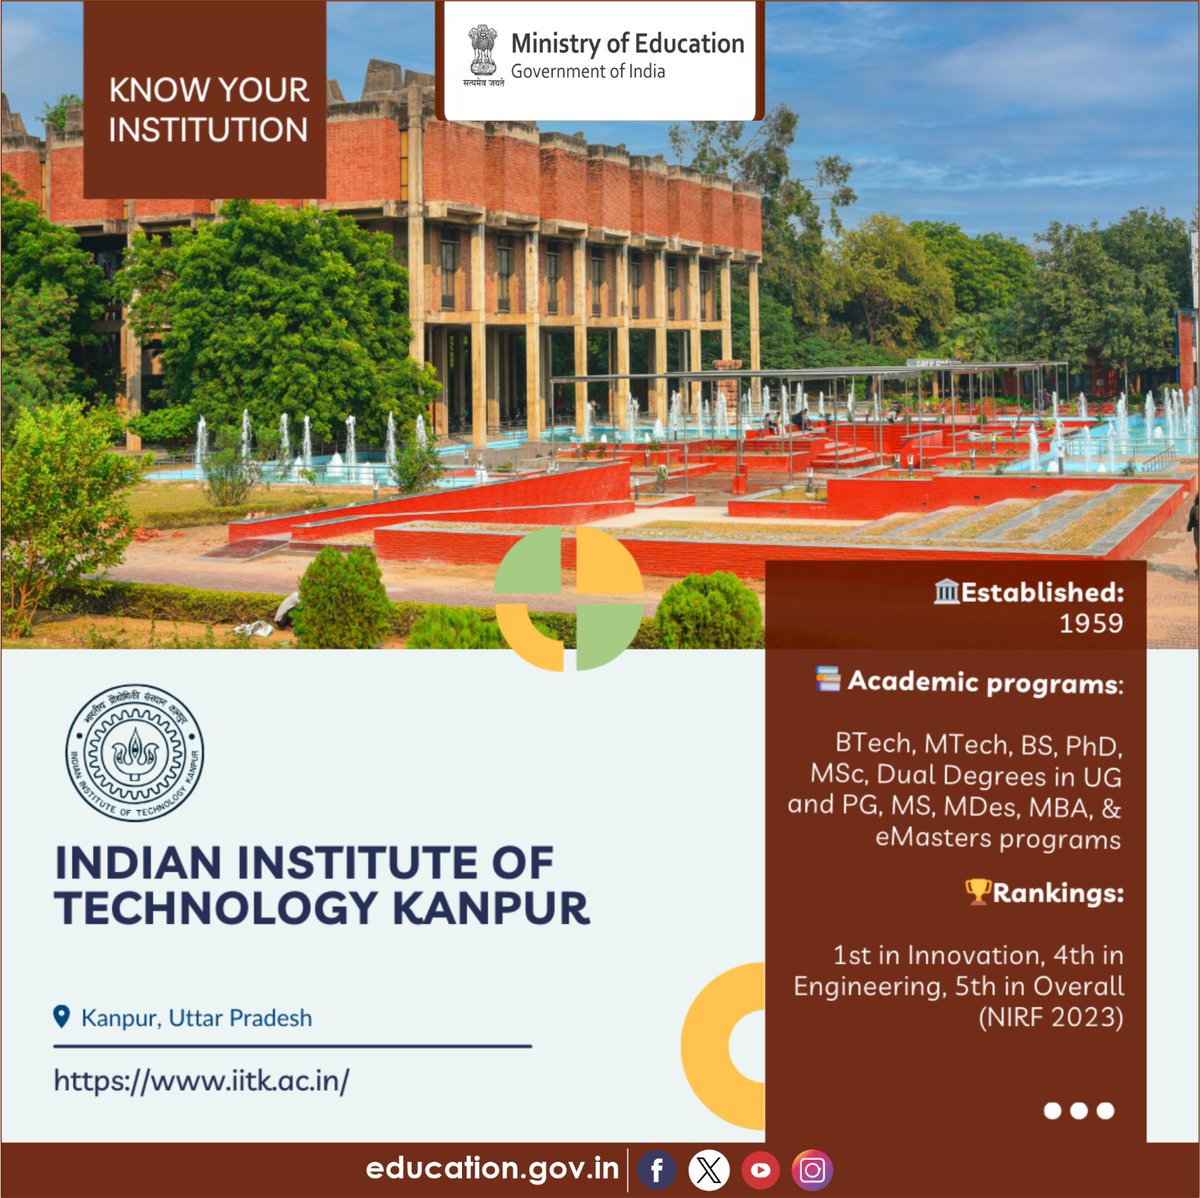 Know the HEIs of India! Indian Institute of Technology Kanpur (IITK) was established in 1959 and was granted the status of Institute of National Importance by the Government of India. Spread over a sprawling lush green campus of more than 1000 acres, the institute has 19